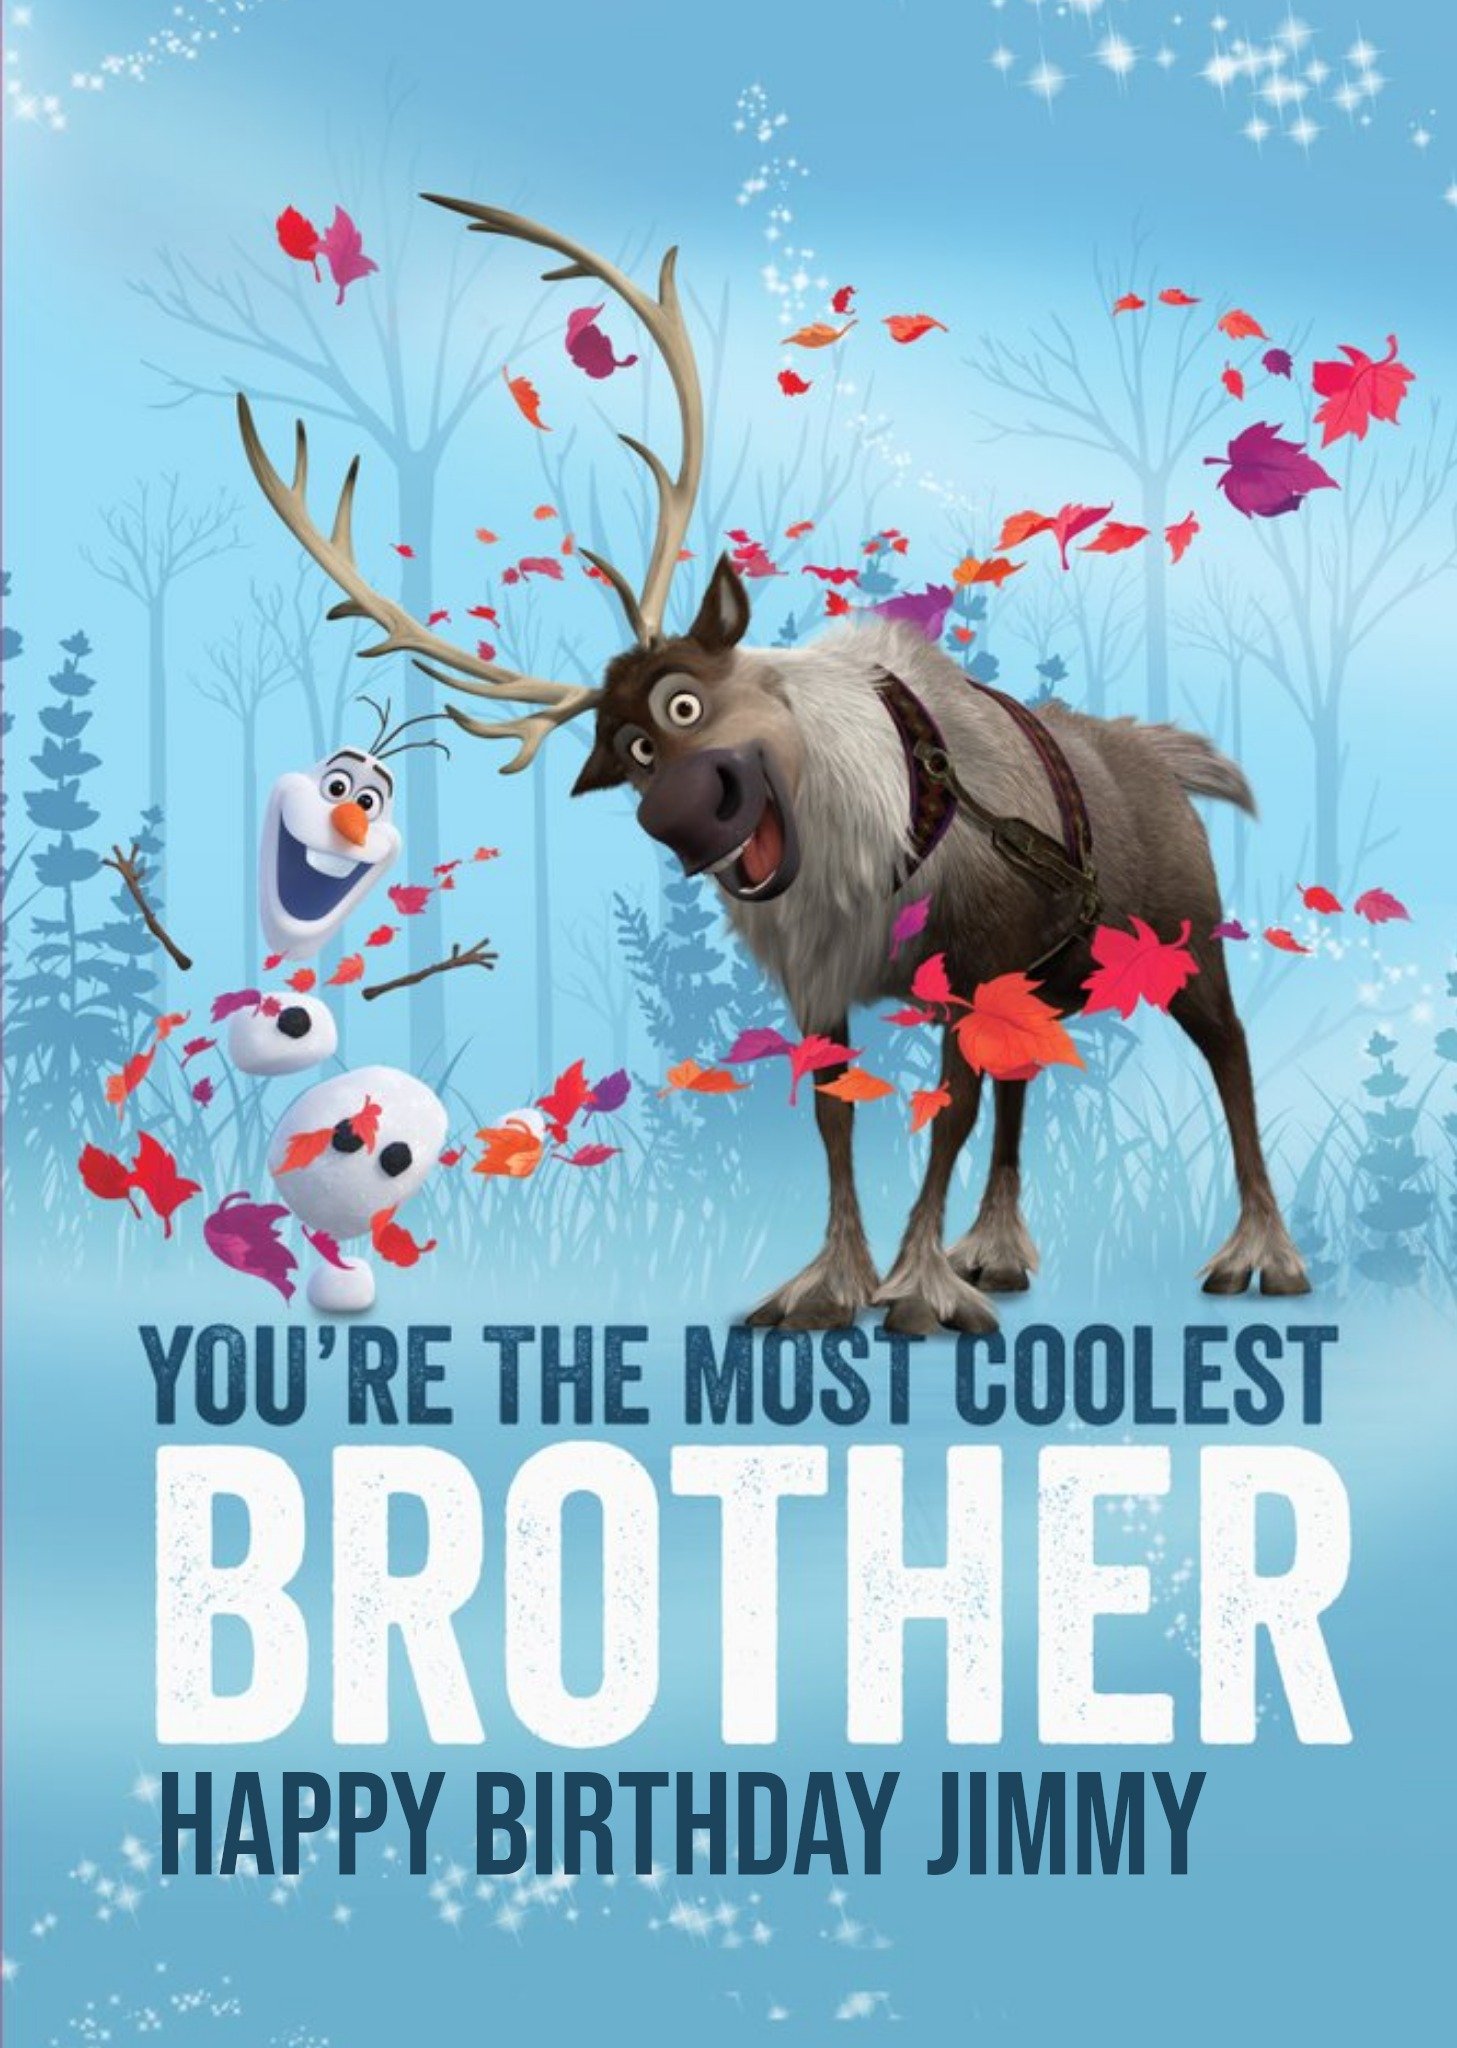 Disney Frozen 2 Sven And Olaf Coolest Brother Birthday Card Ecard